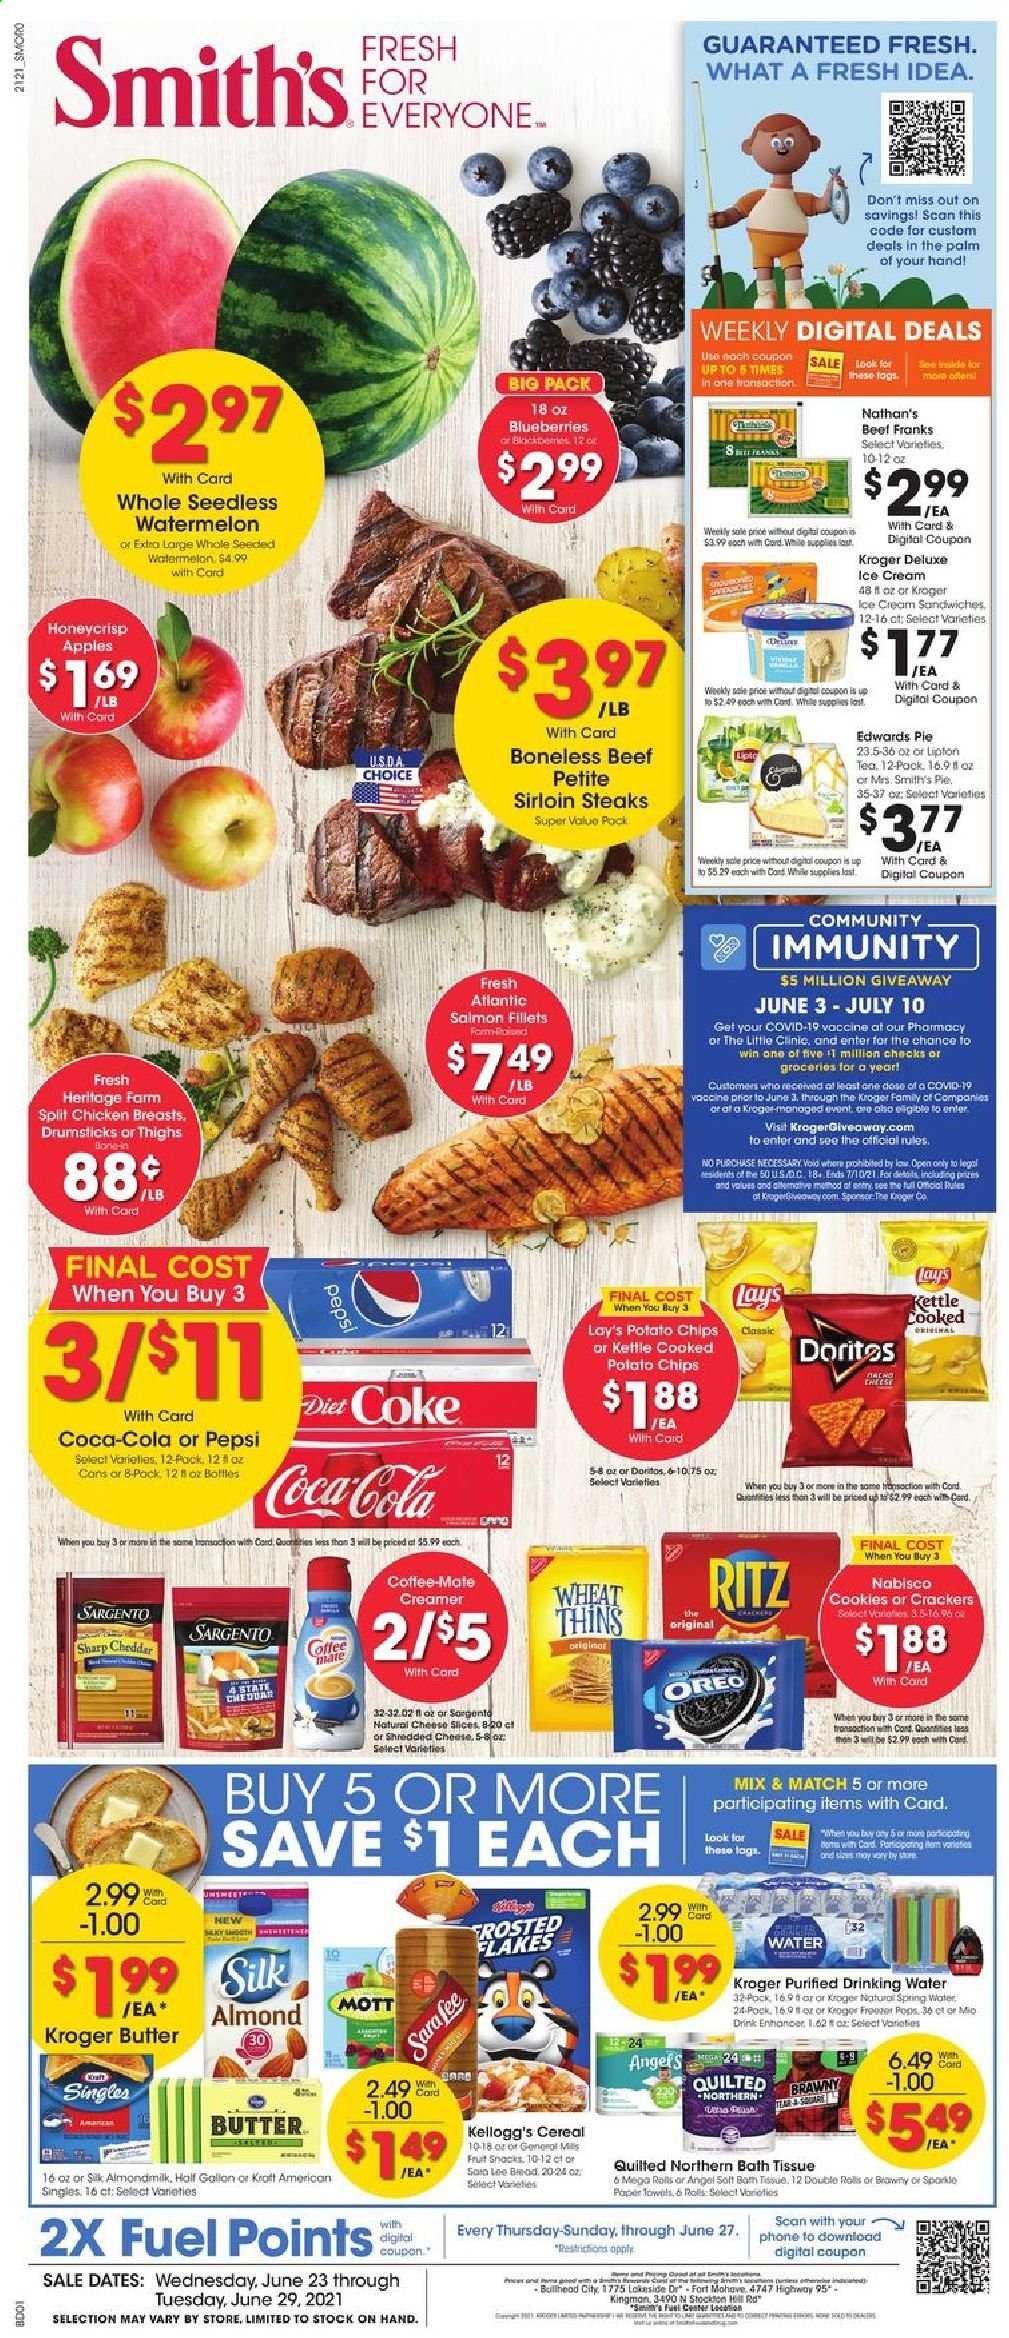 thumbnail - Smith's Flyer - 06/23/2021 - 06/29/2021 - Sales products - pie, Sara Lee, apples, blueberries, watermelon, salmon, salmon fillet, shredded cheese, sliced cheese, Sargento, Oreo, almond milk, Coffee-Mate, Silk, butter, creamer, ice cream, cookies, crackers, Kellogg's, fruit snack, RITZ, Doritos, potato chips, chips, Lay’s, Smith's, Thins, cereals, Coca-Cola, Pepsi, Lipton, spring water, tea, L'Or, chicken breasts, steak, sirloin steak, bath tissue, Quilted Northern, gallon, Sharp, paper. Page 1.